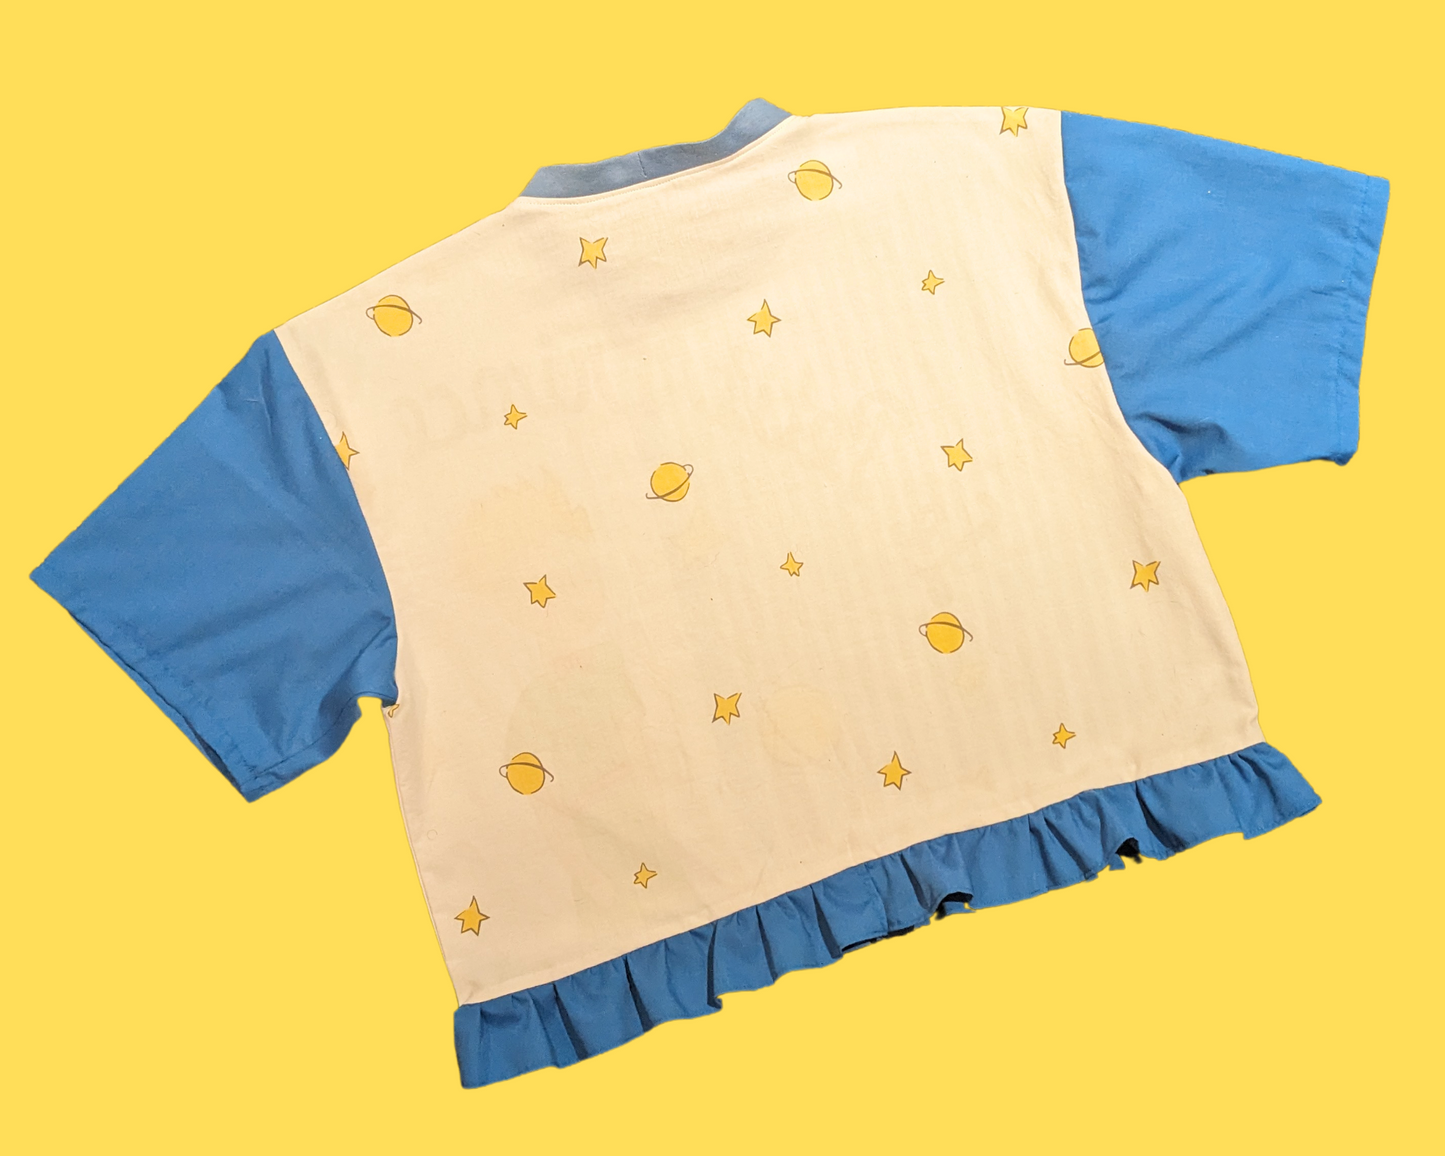 Handmade, Upcycled Le Petit Prince Pillowcase Crop Top Oversized M